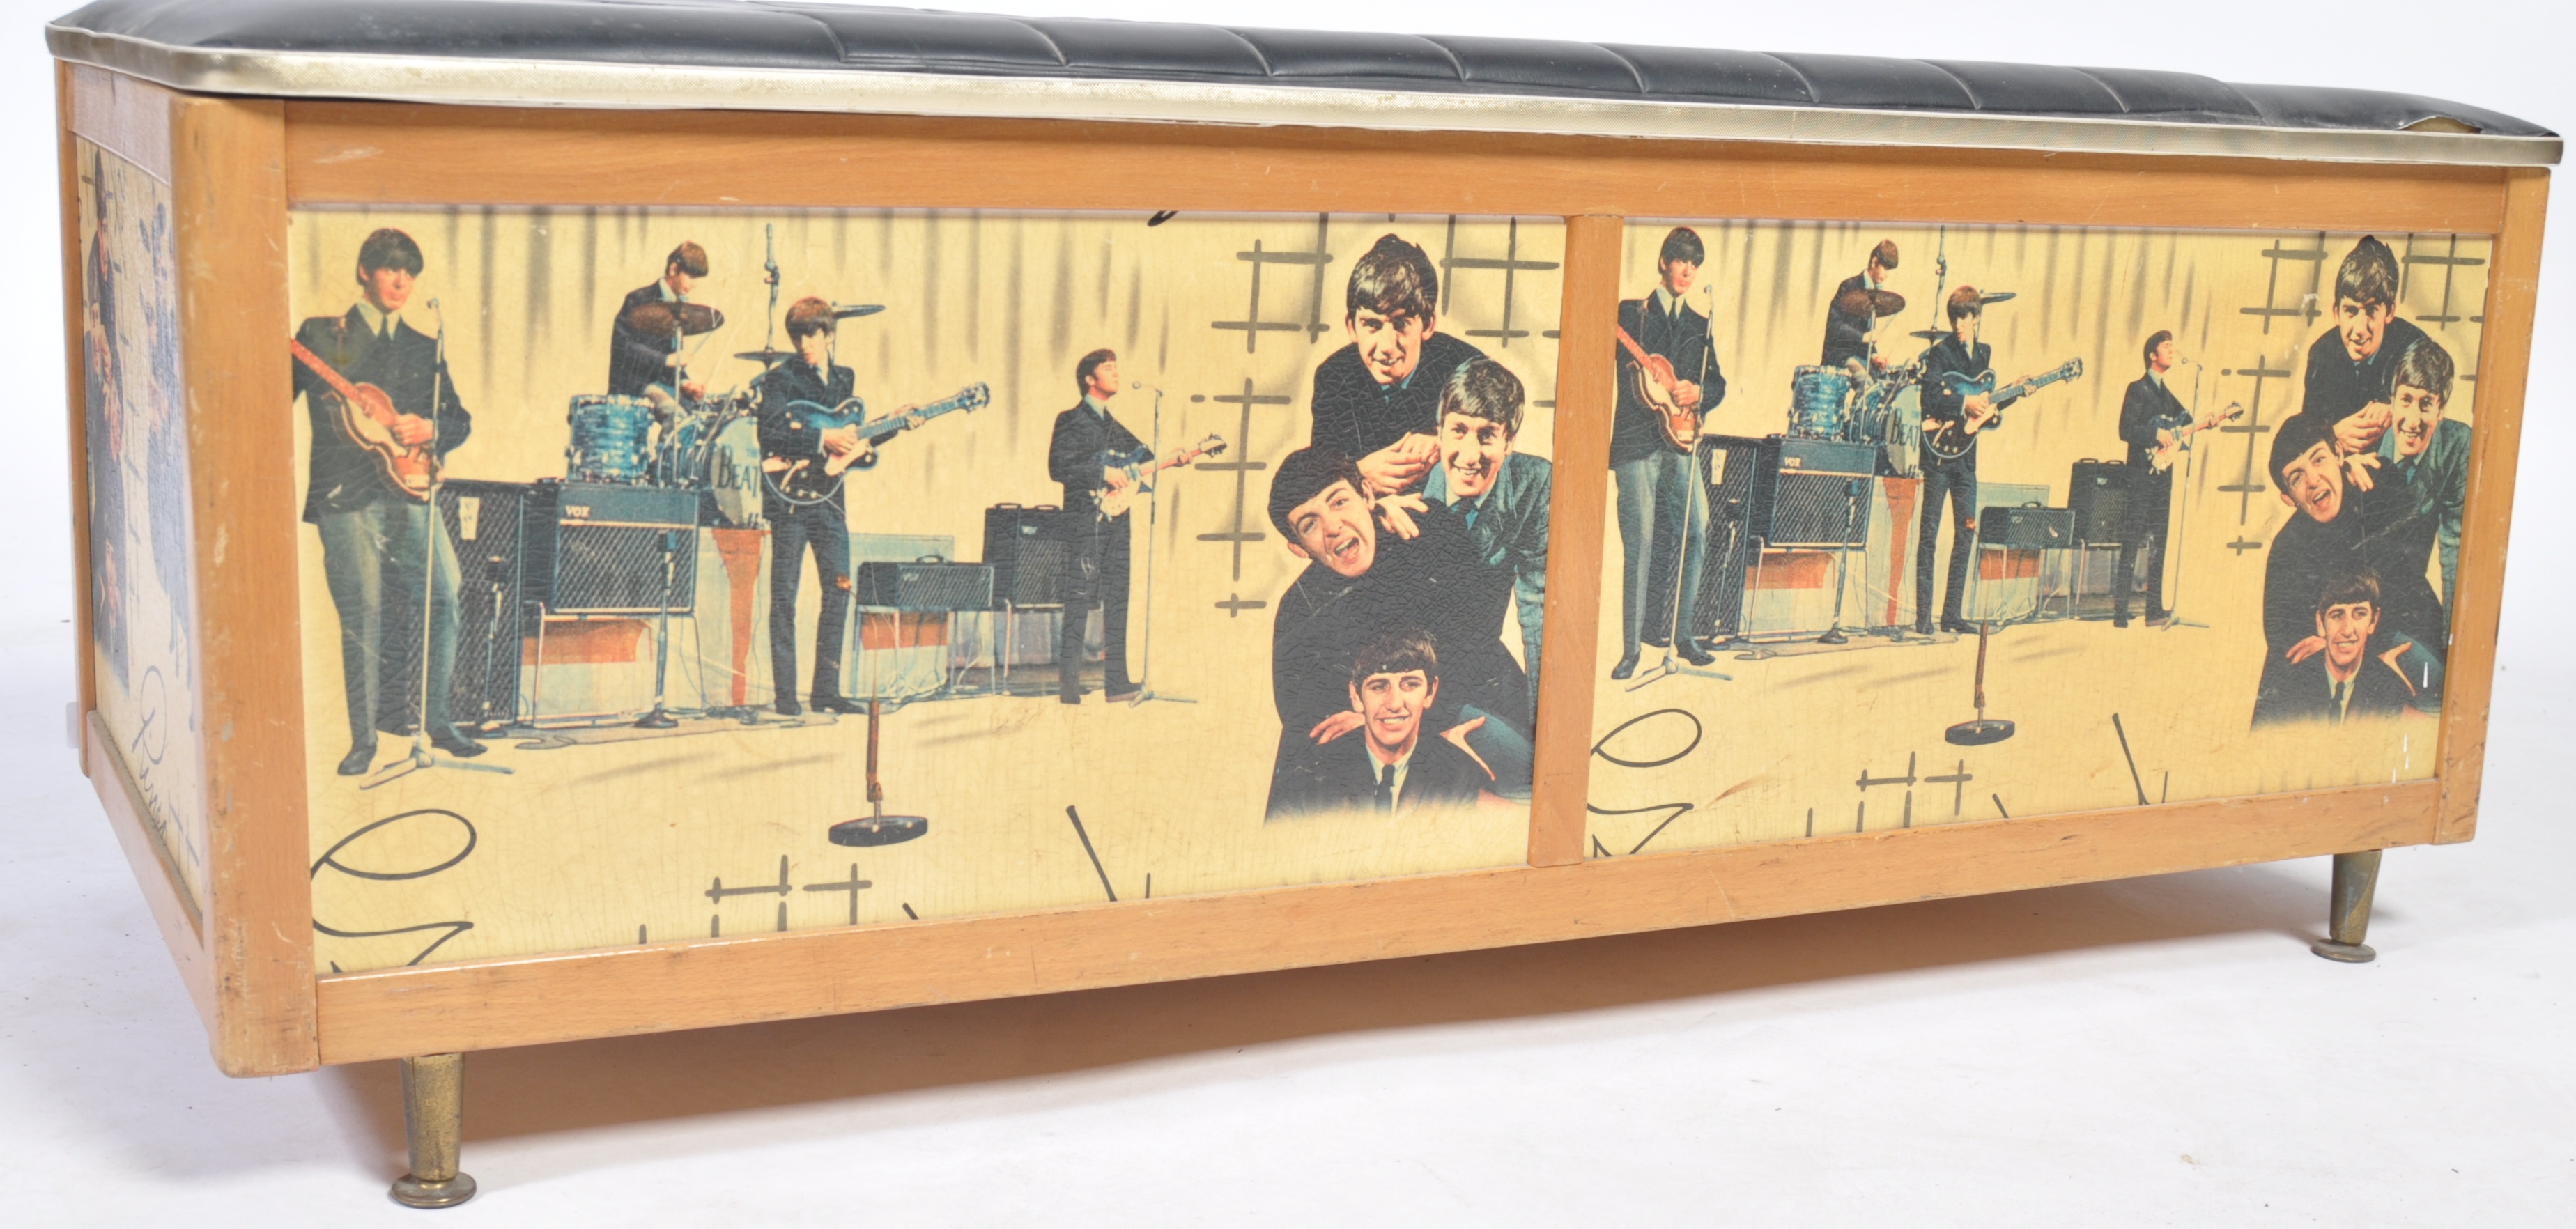 RARE 1960'S BEATLES OTTOMAN / BLANKET BOX BY AVALO - Image 5 of 8